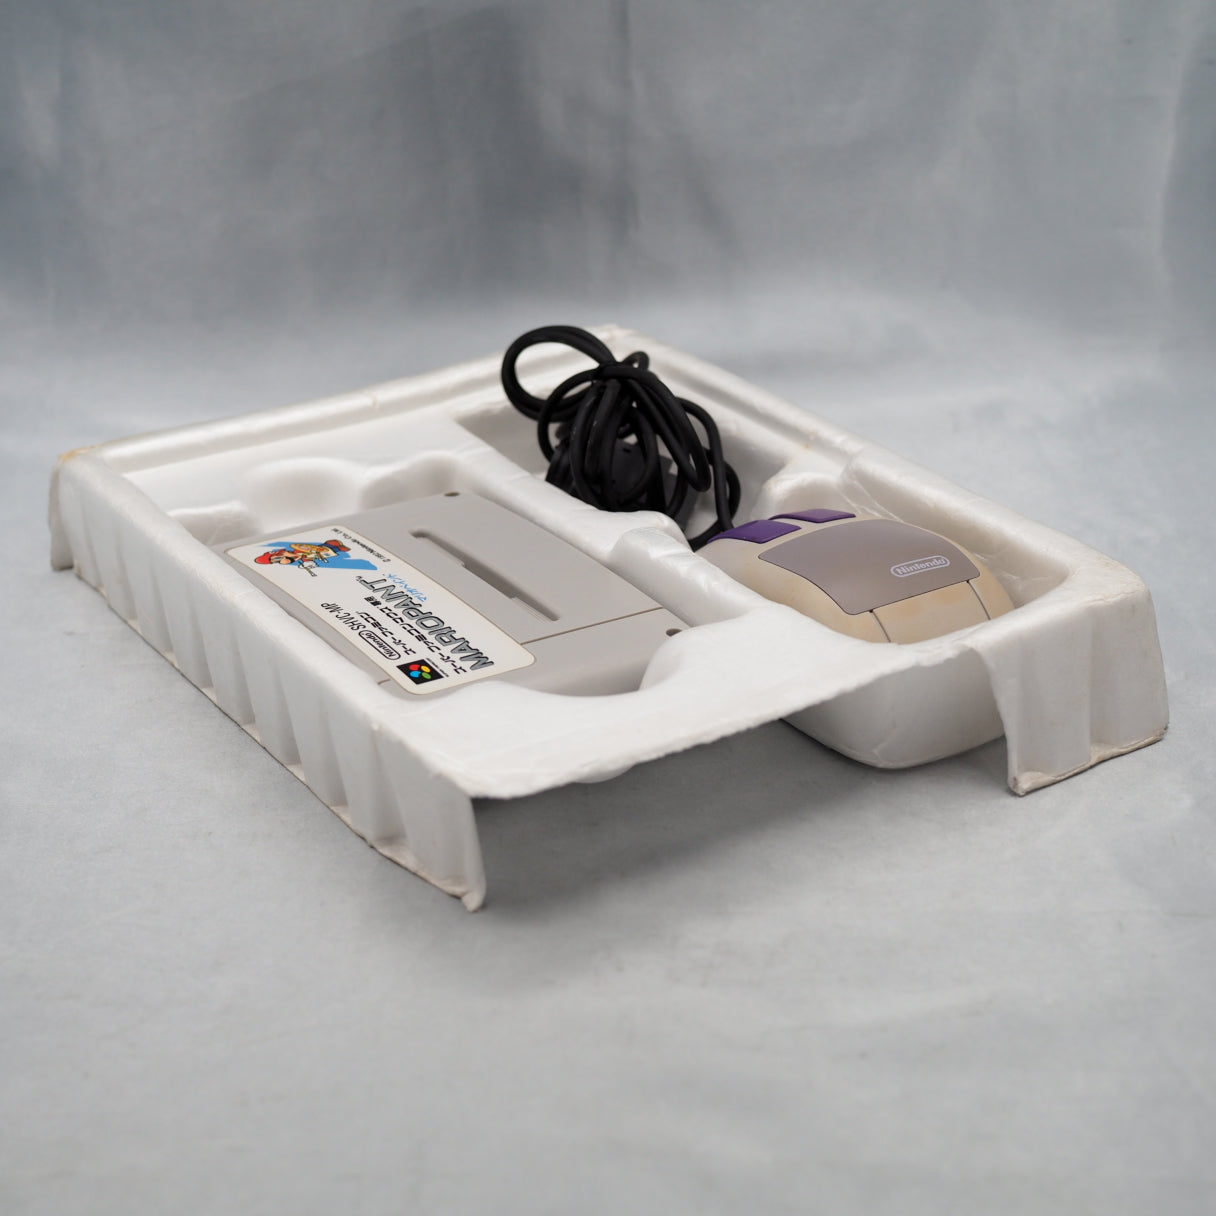 MARIO PAINT Mouse Controller Boxed